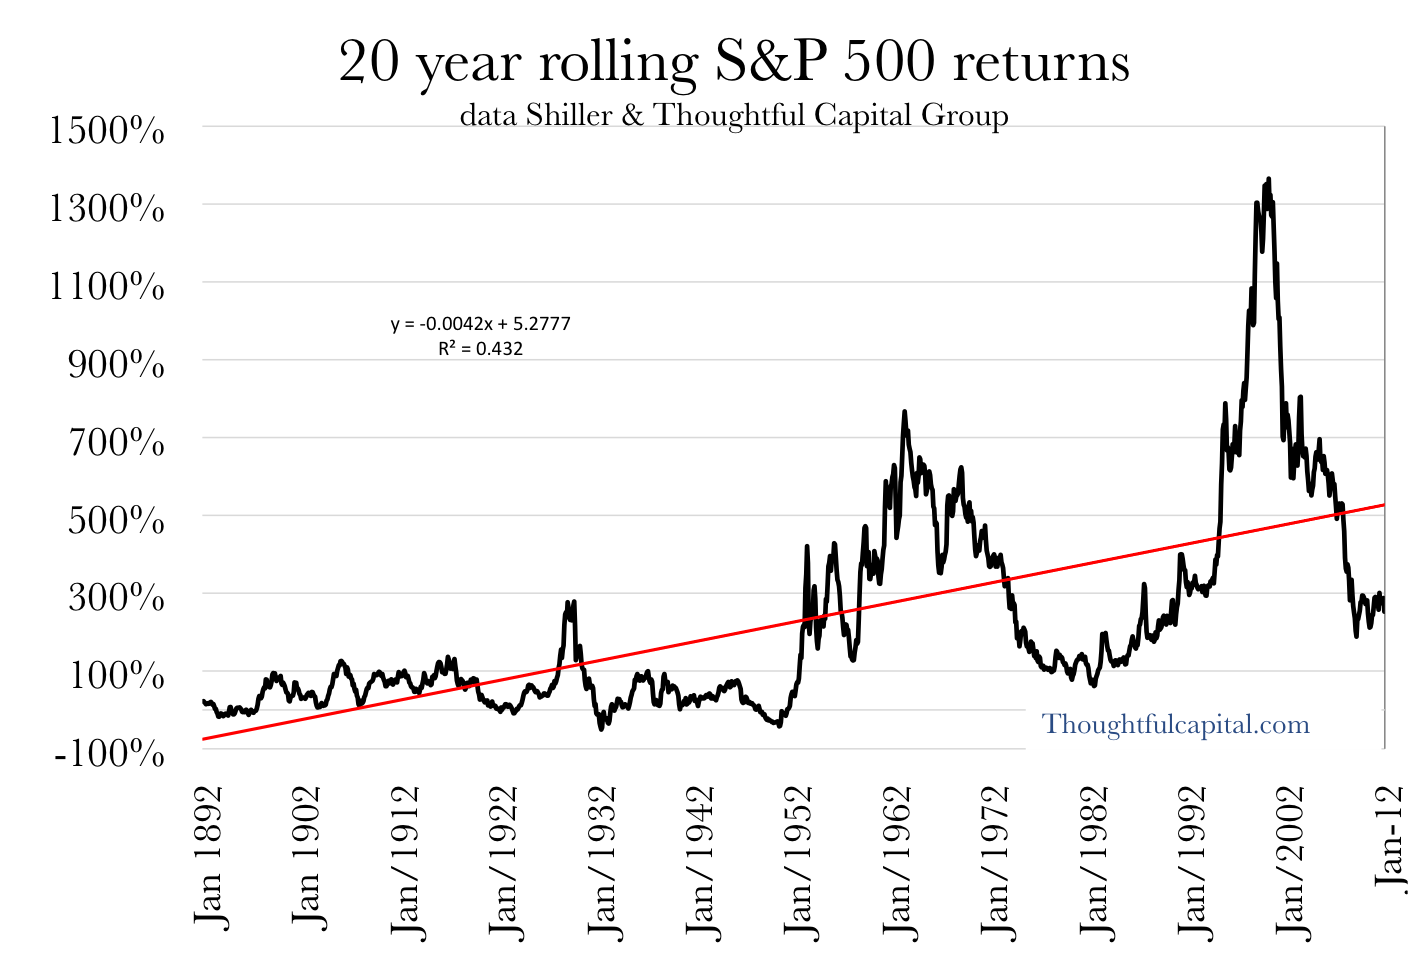 S&P 500 20 year rolling returns 1871-2011